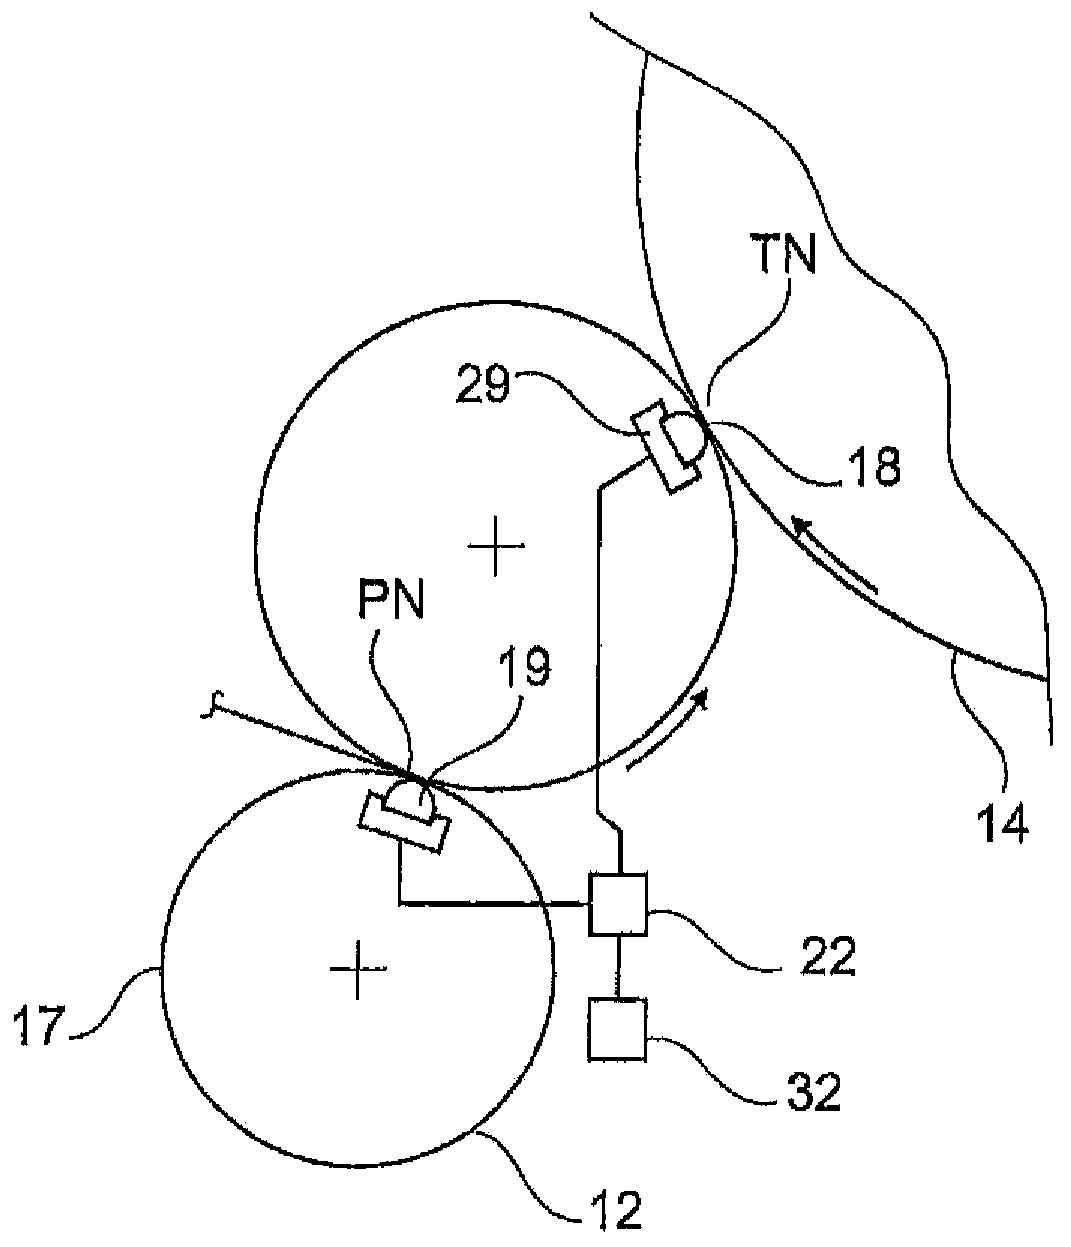 A paper making machine for making tissue paper and a method of operating a paper making machine